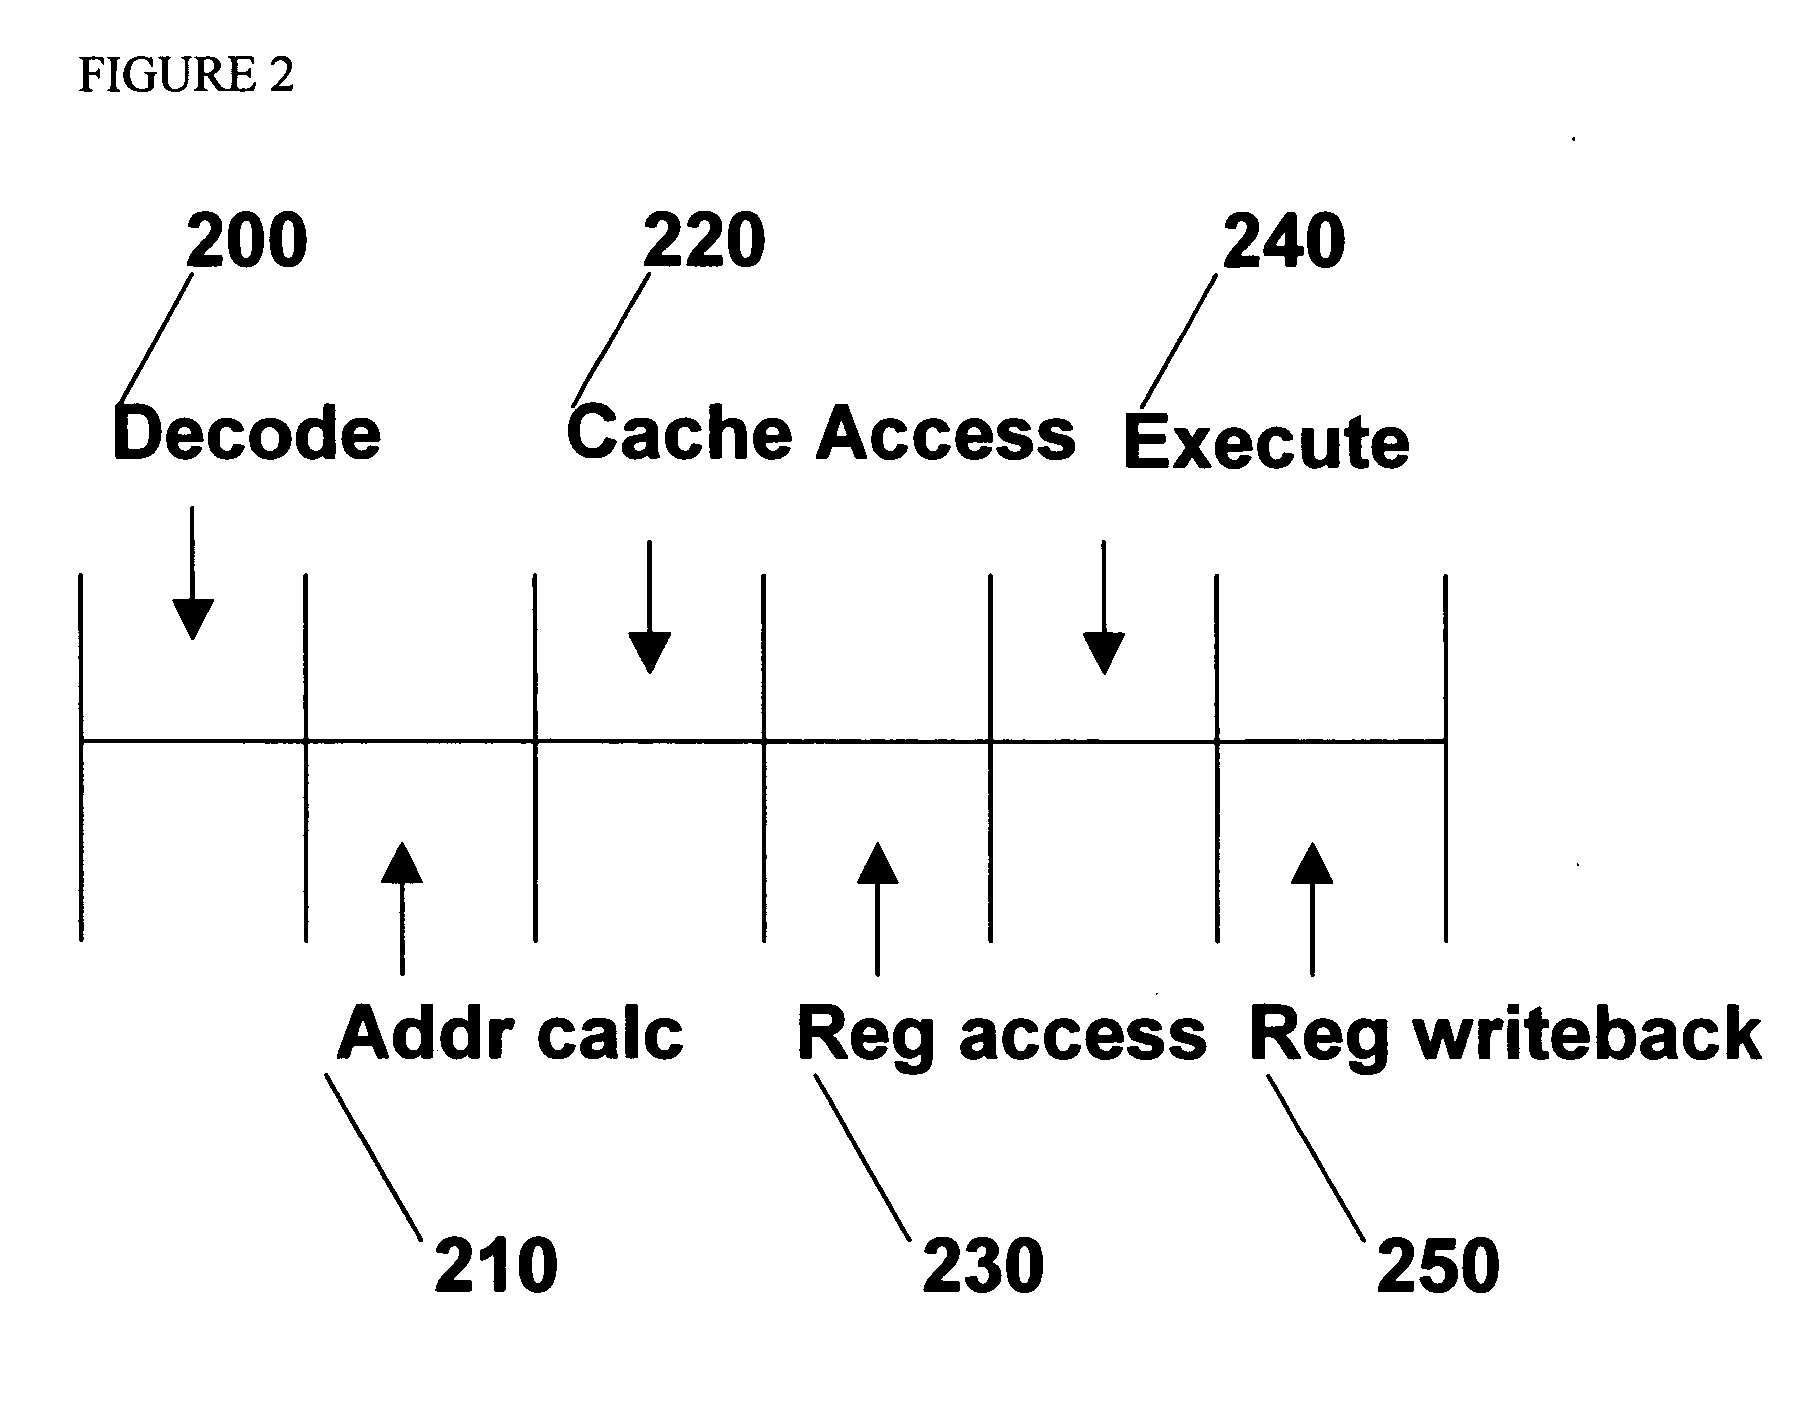 Linked instruction buffering of basic blocks for asynchronous predicted taken branches